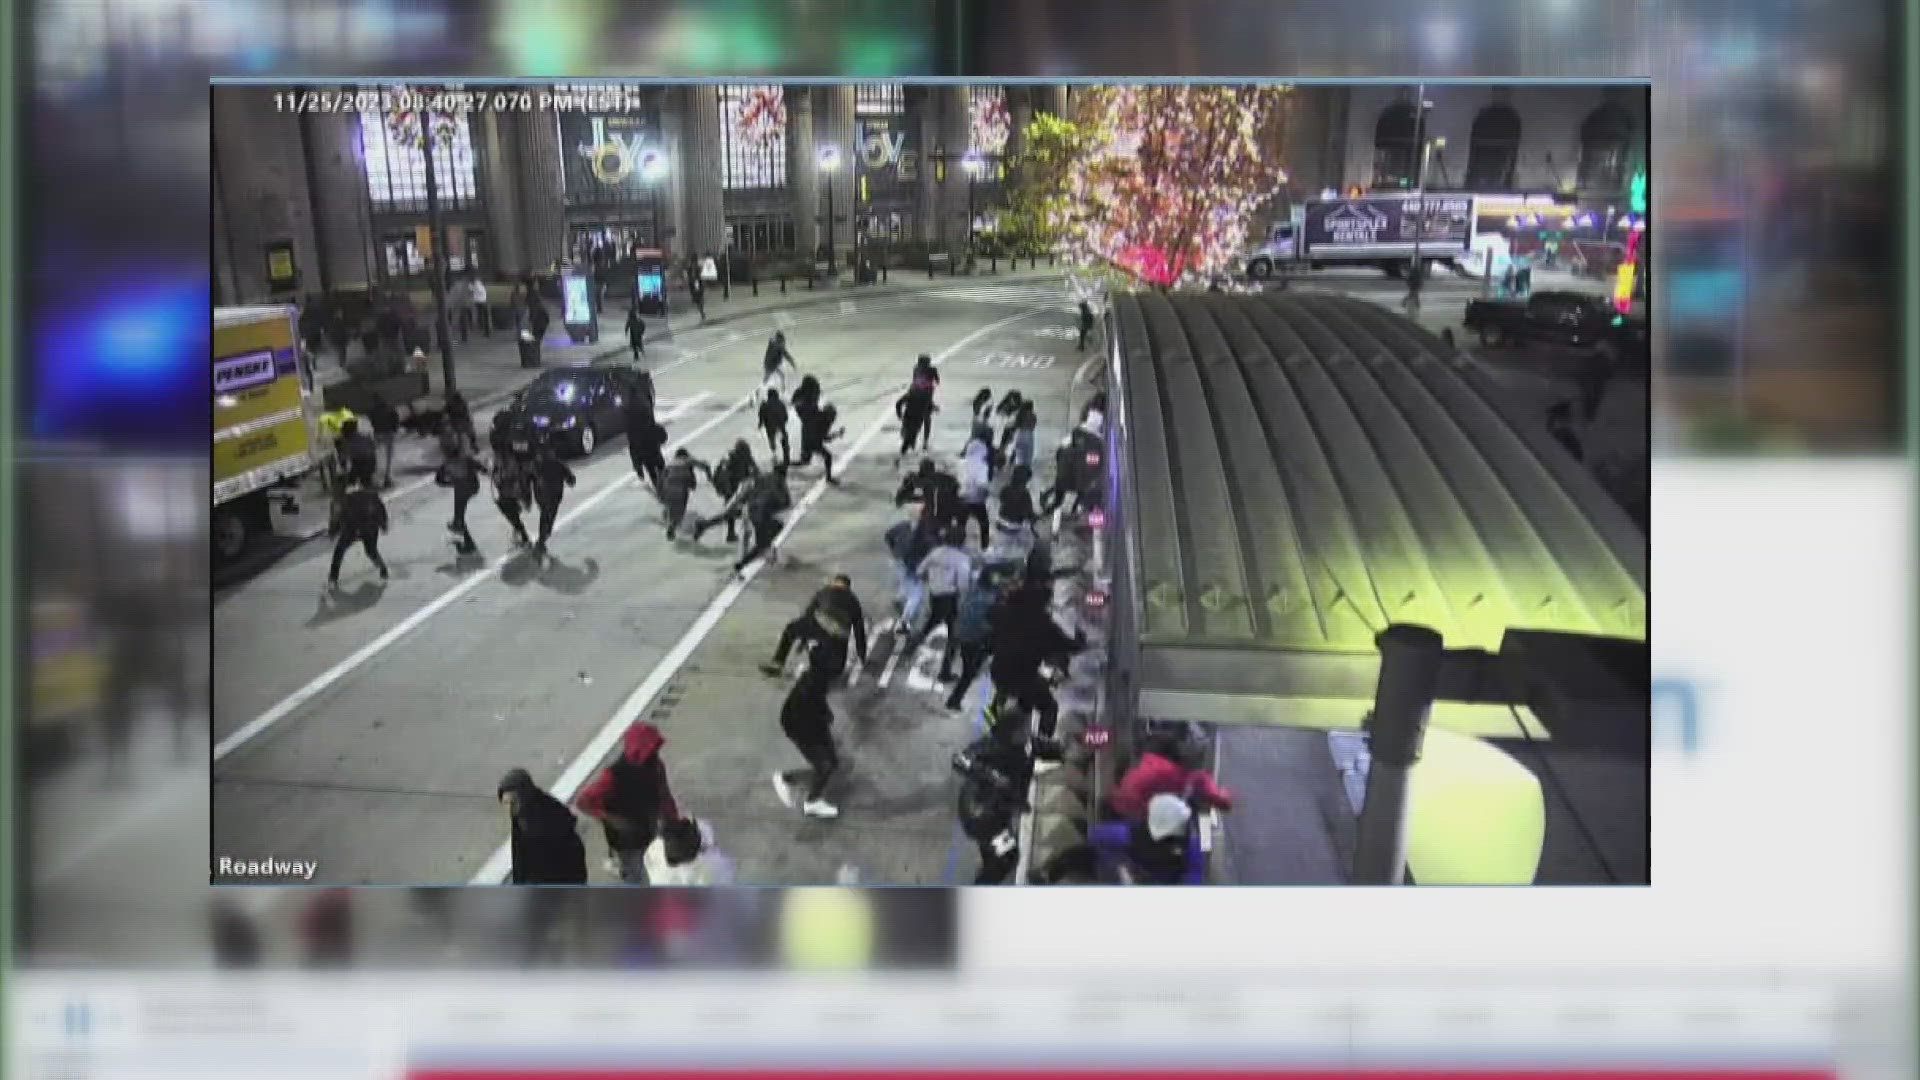 The footage, released by the RTA, shows those assembled scattering as shots were fired. Two teens were taken to the hospital for their injuries.